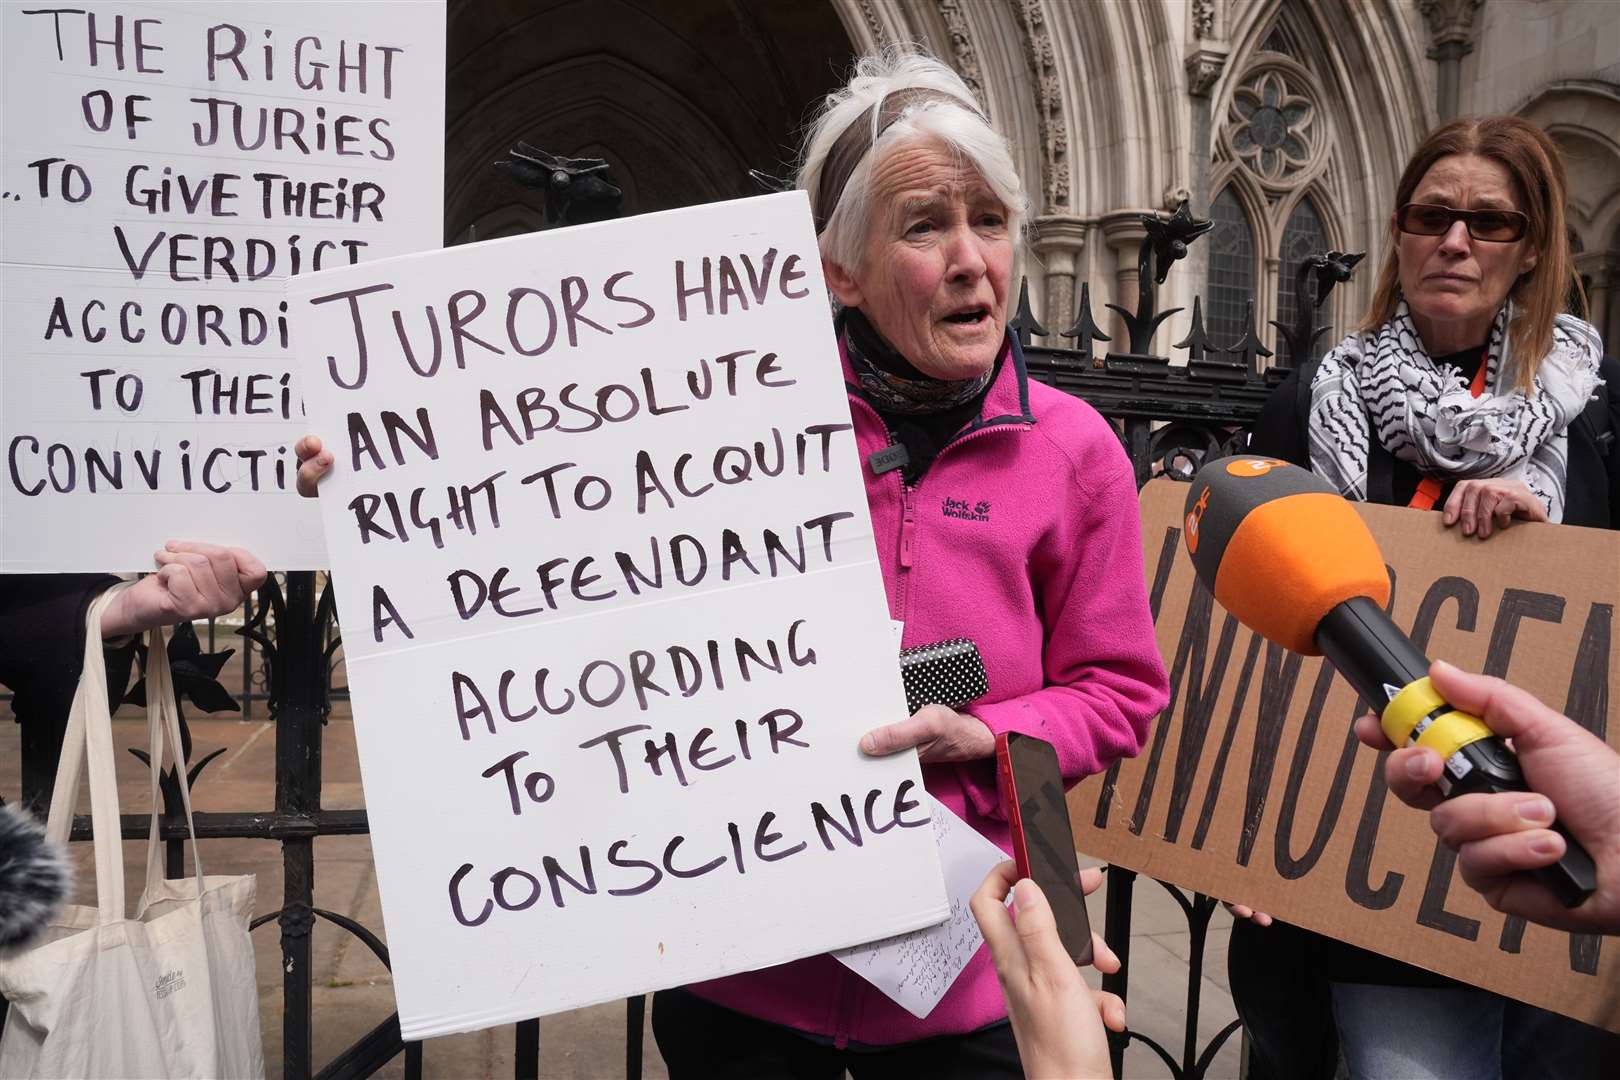 Trudi Warner holding the sign outside the Royal Courts of Justice in London (Lucy North/PA)